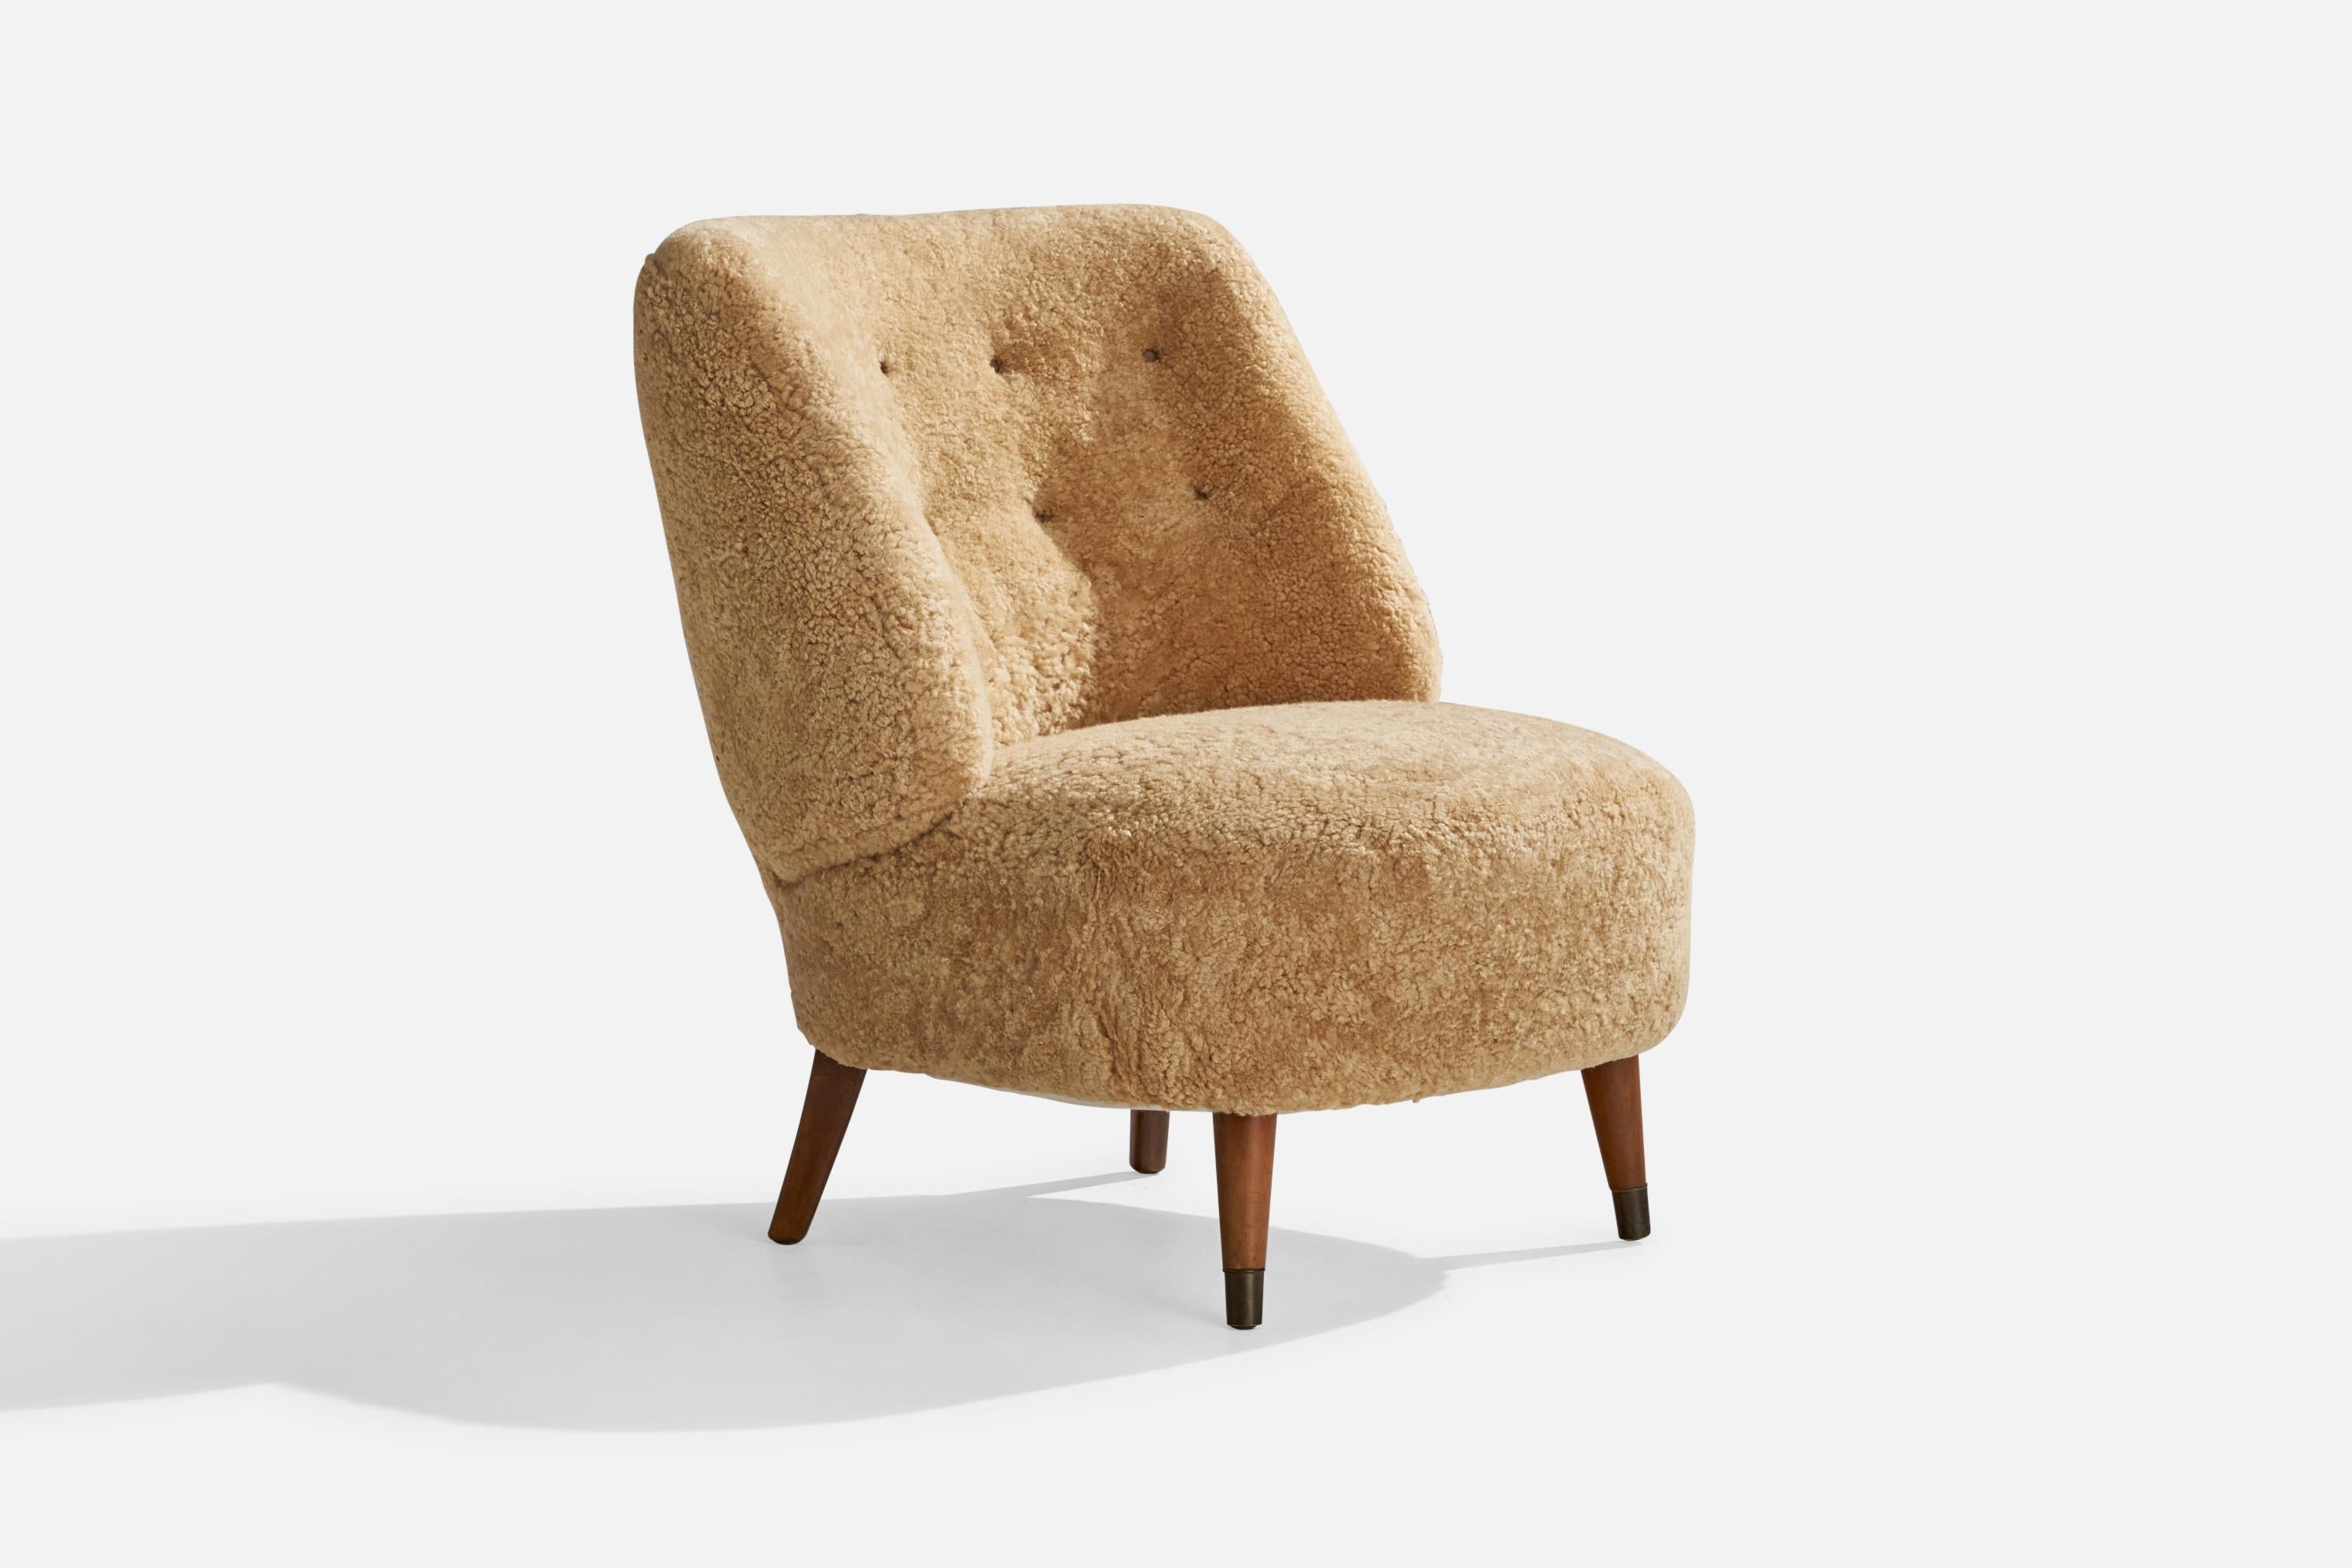 A beige shearling, wood and brass lounge chair designed and produced by Sven Staaf, Sweden, 1940s.

seat height 16.5”.